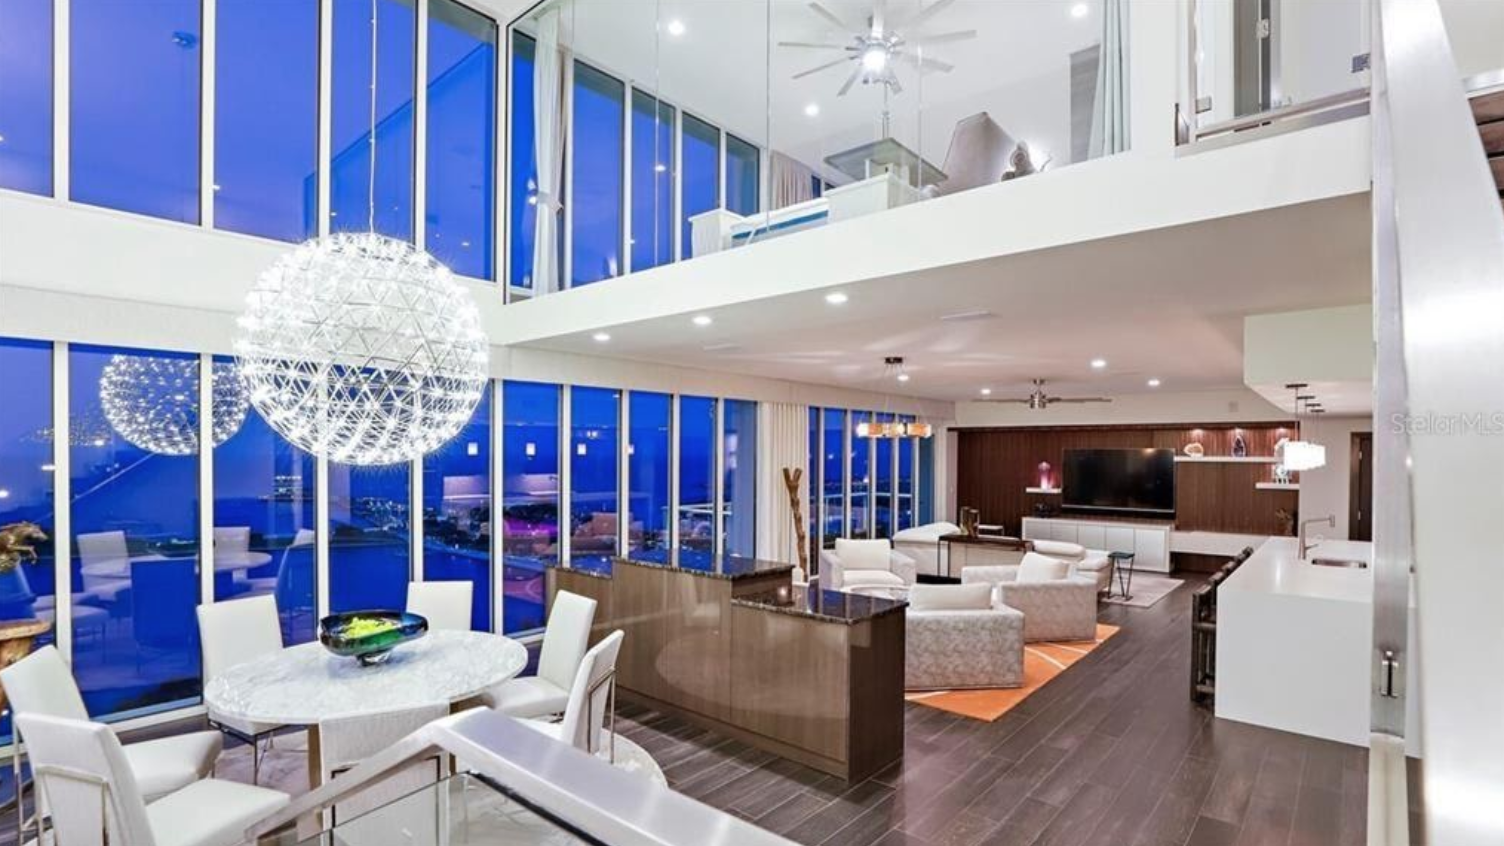 Two-story penthouse at Bliss Condos